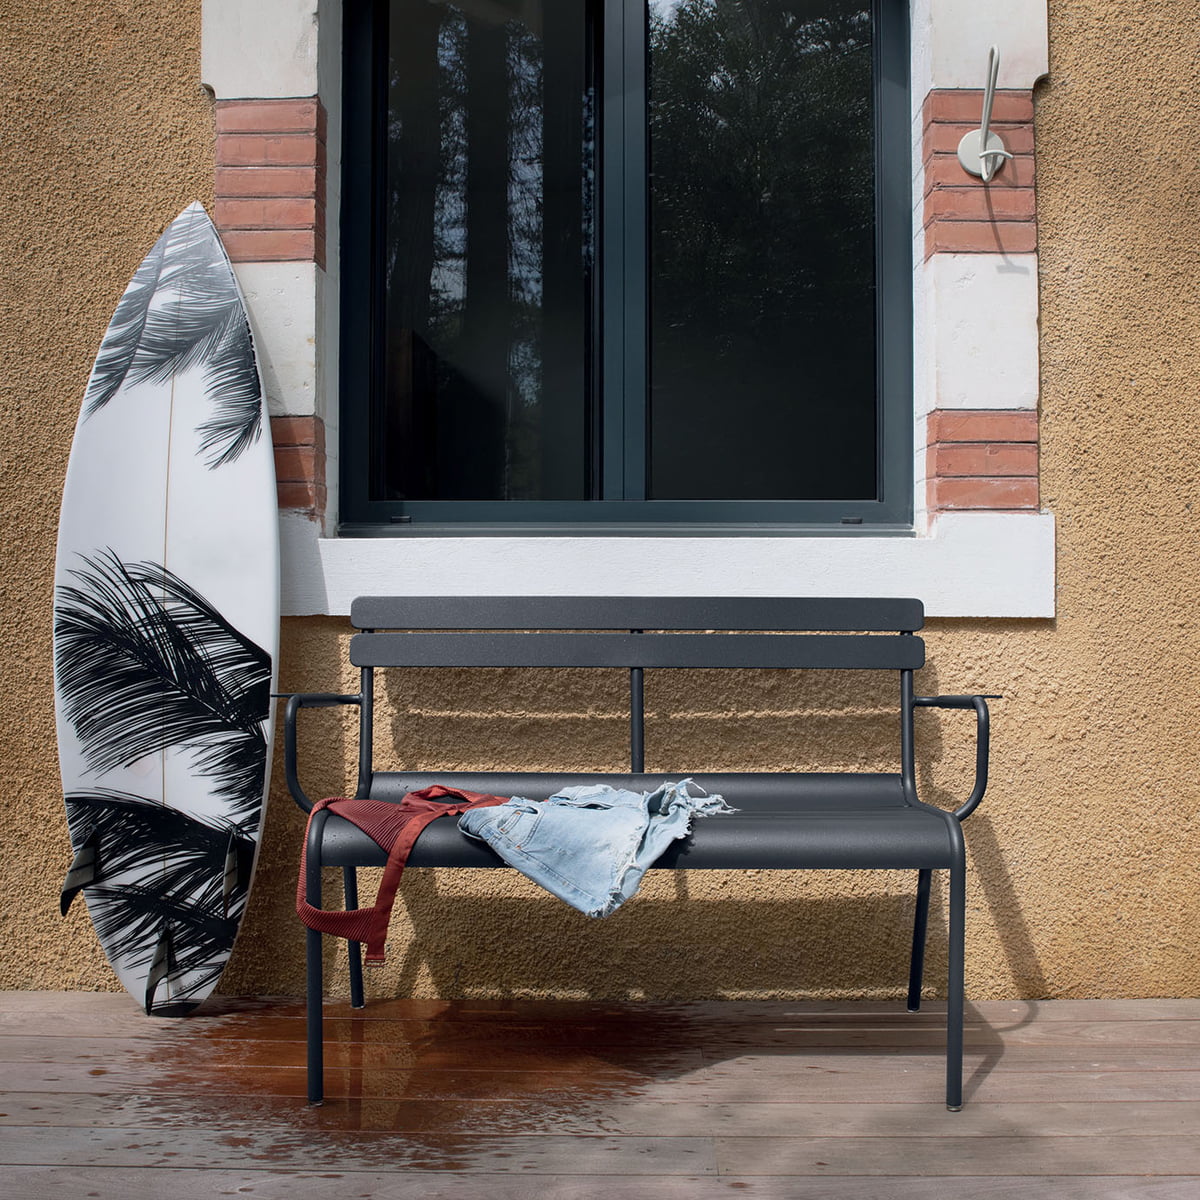 Fermob Luxembourg 2-Seater Garden Bench outside next to surfboard